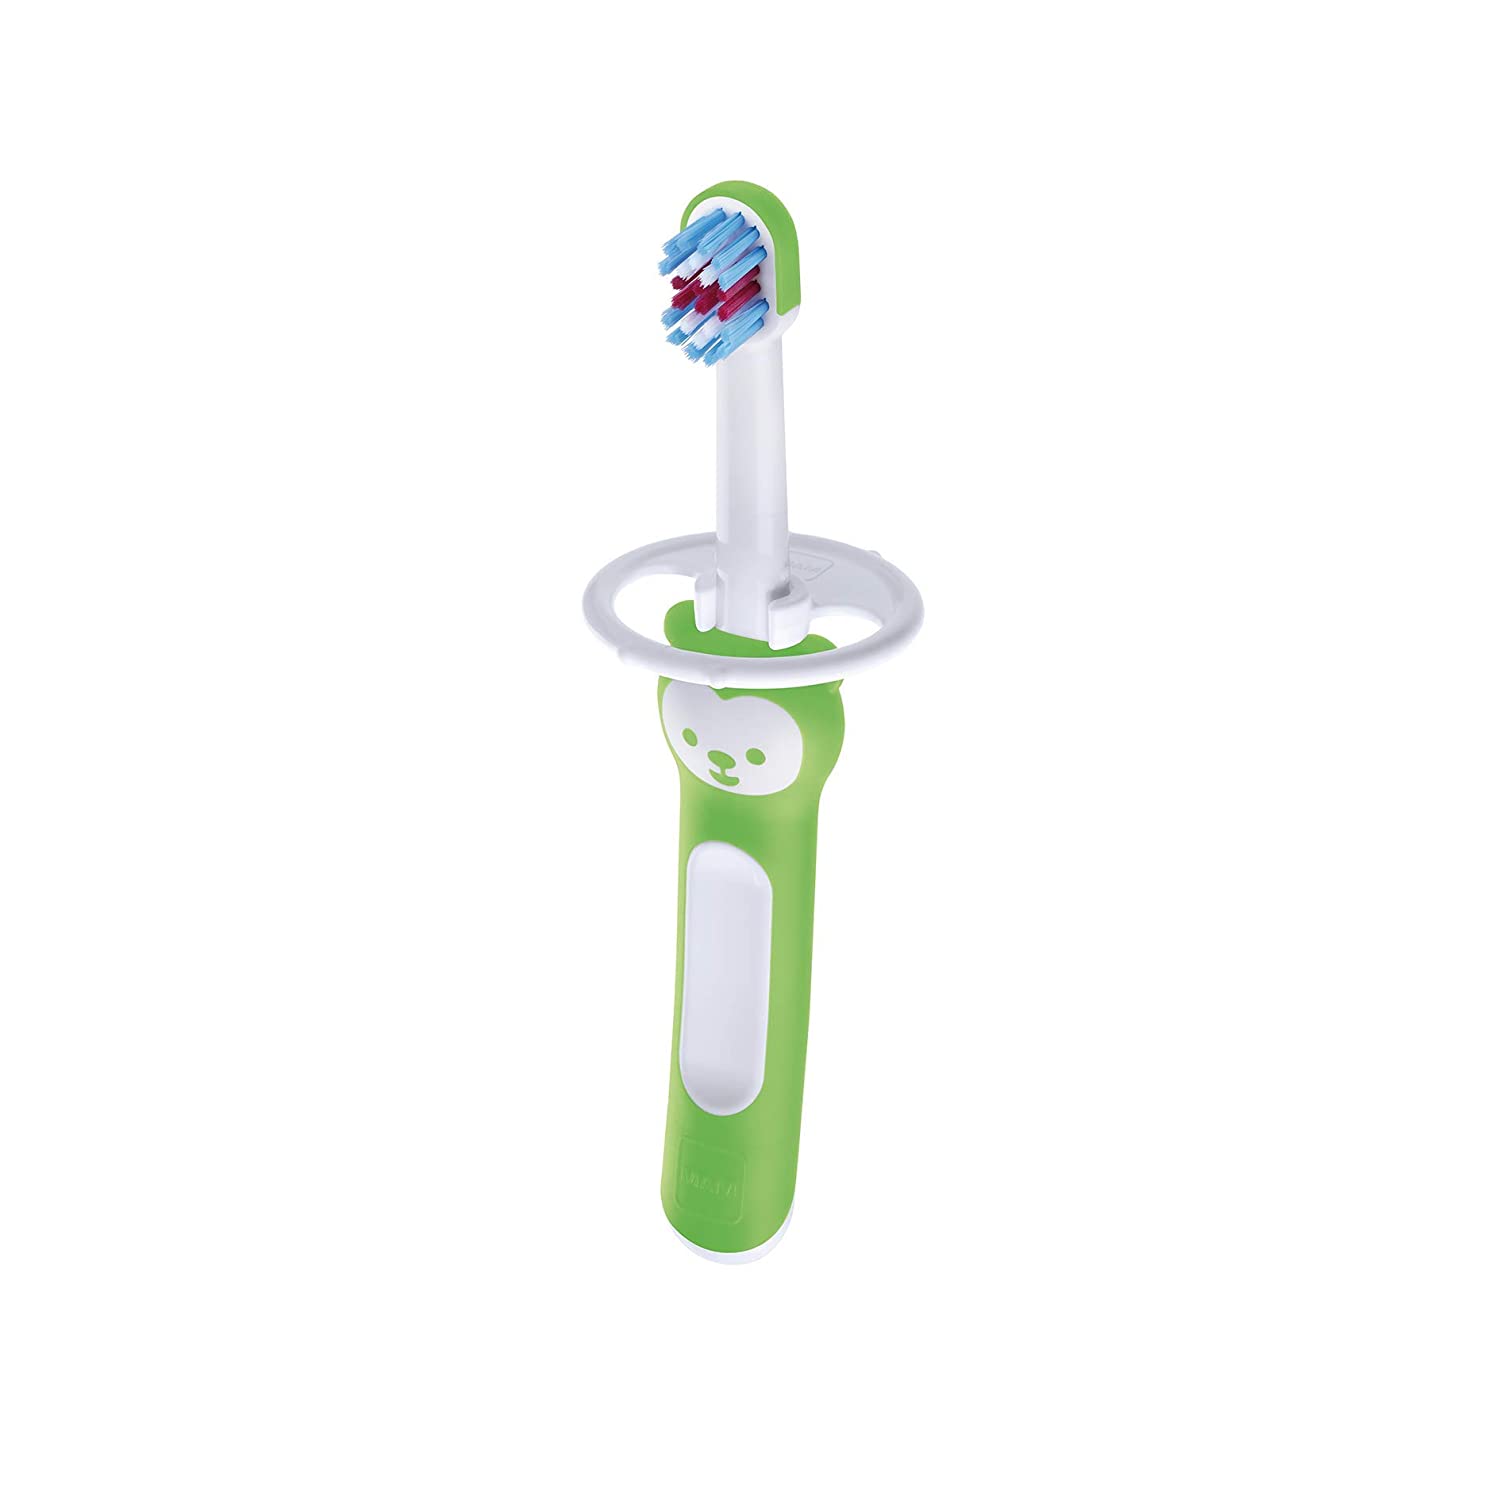 MAM Baby\'s Brush Set C120 Short and Compact Handle Toothbrush with Safety Ring for Babies 6m+ (Green)